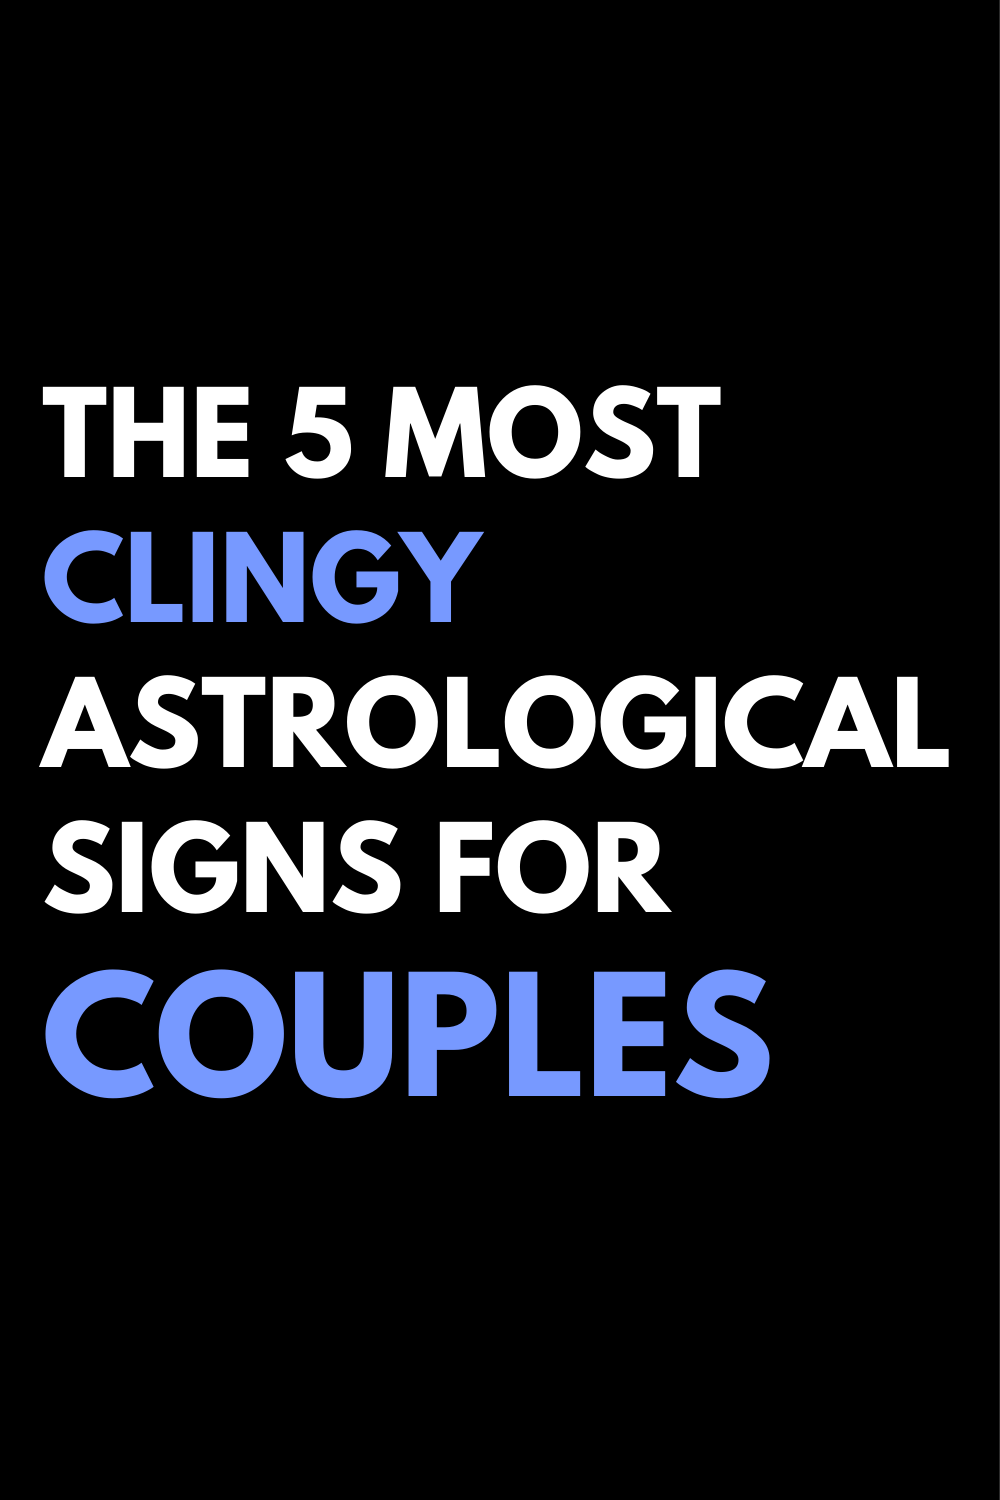 The 5 most clingy astrological signs for couples